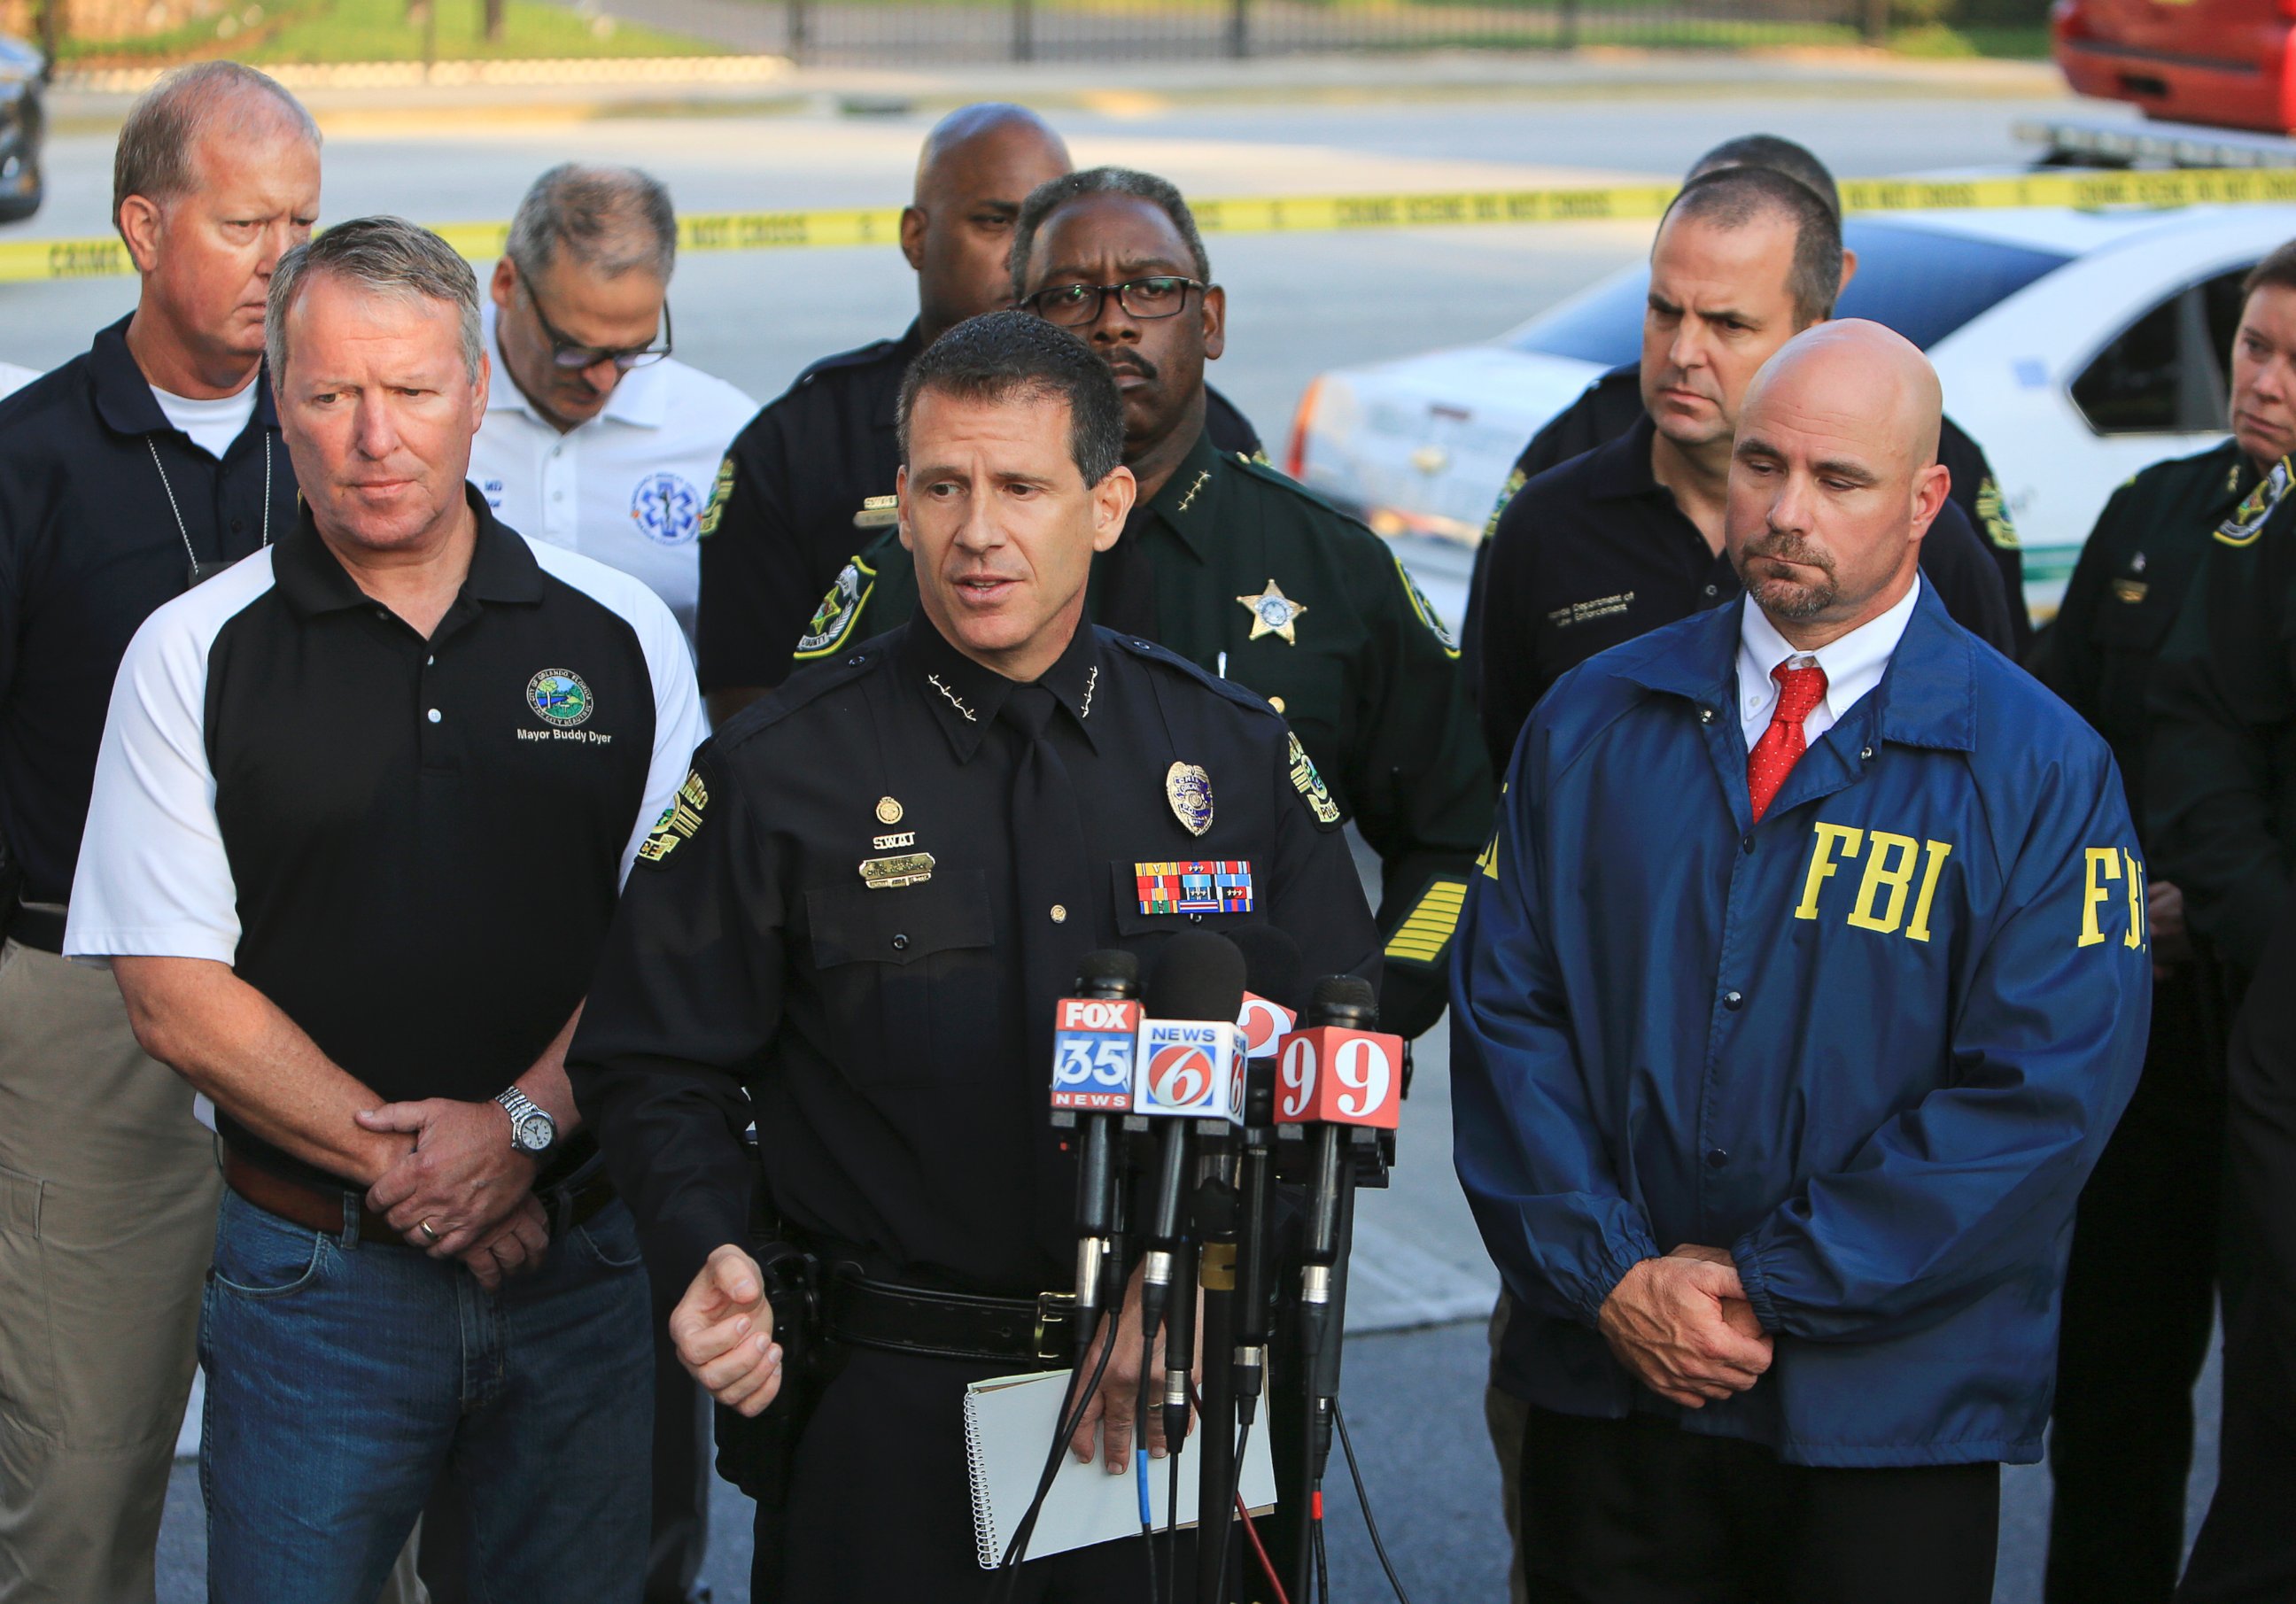 PHOTO: Orlando Police Chief John Mina, center, speaks during a news conference, June 12, 2016, regarding the mass shooting at the Pulse nightclub in Orlando, Fla. 